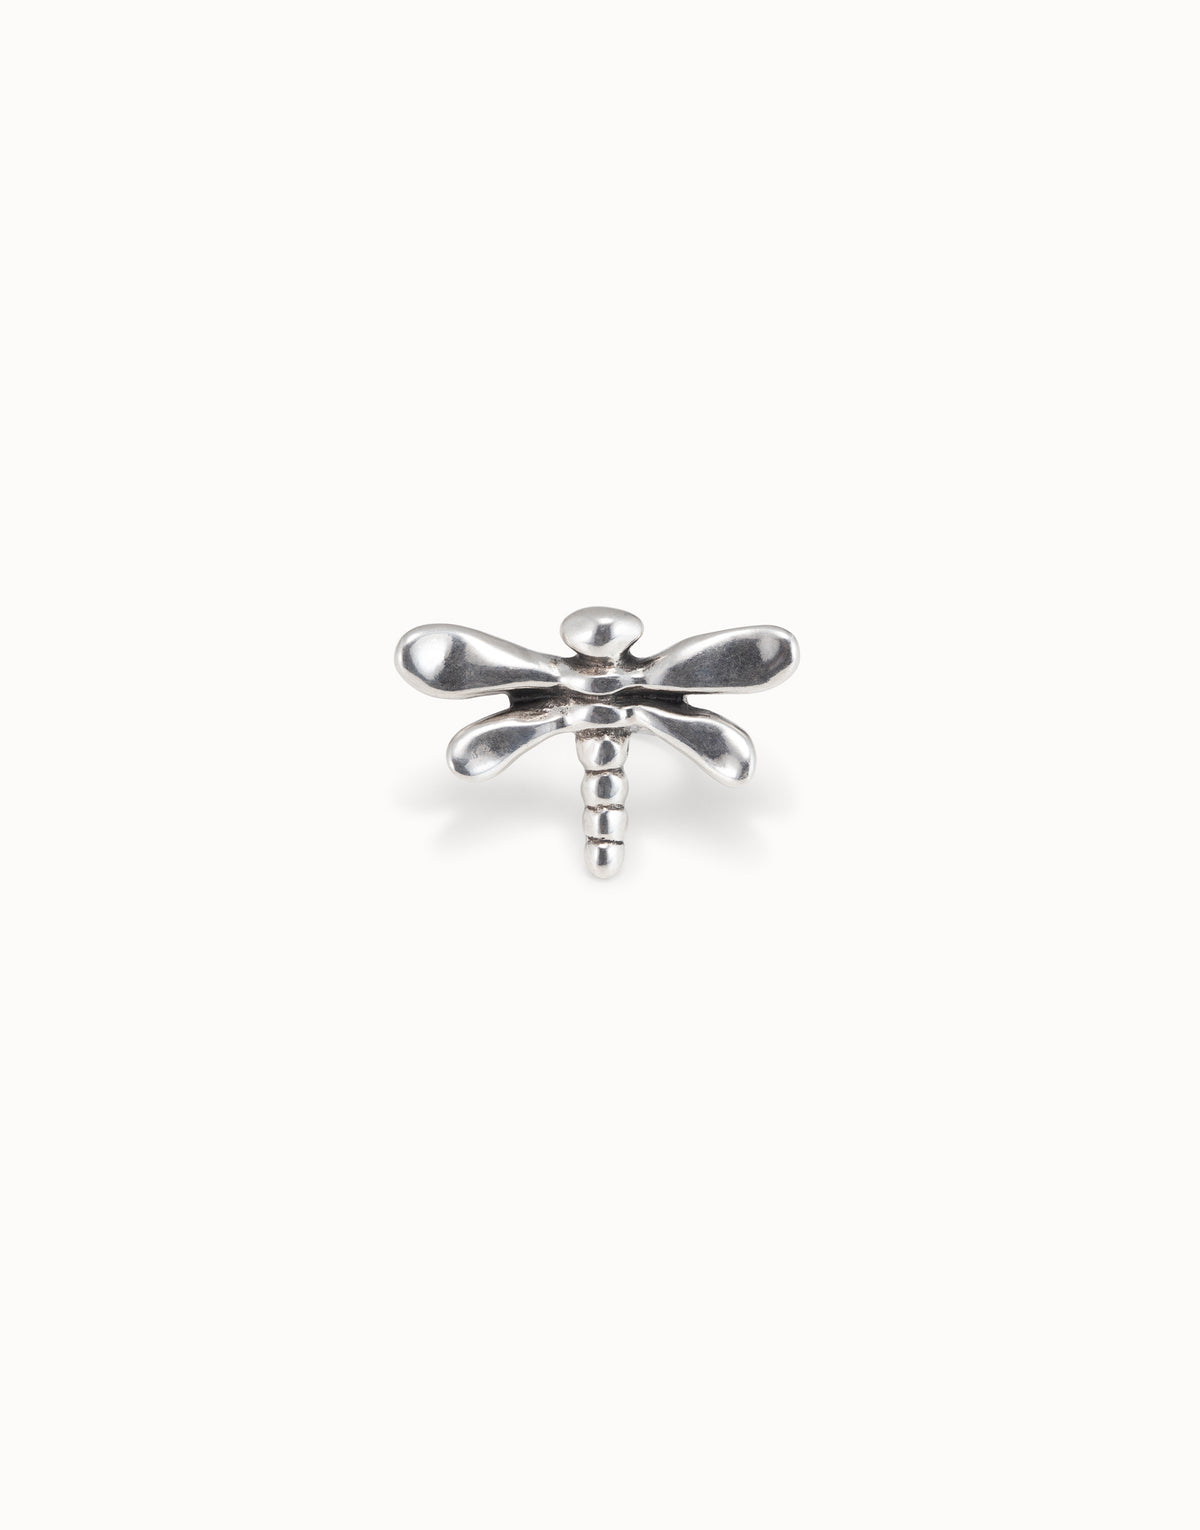 My Dragon Fly Silver Ring